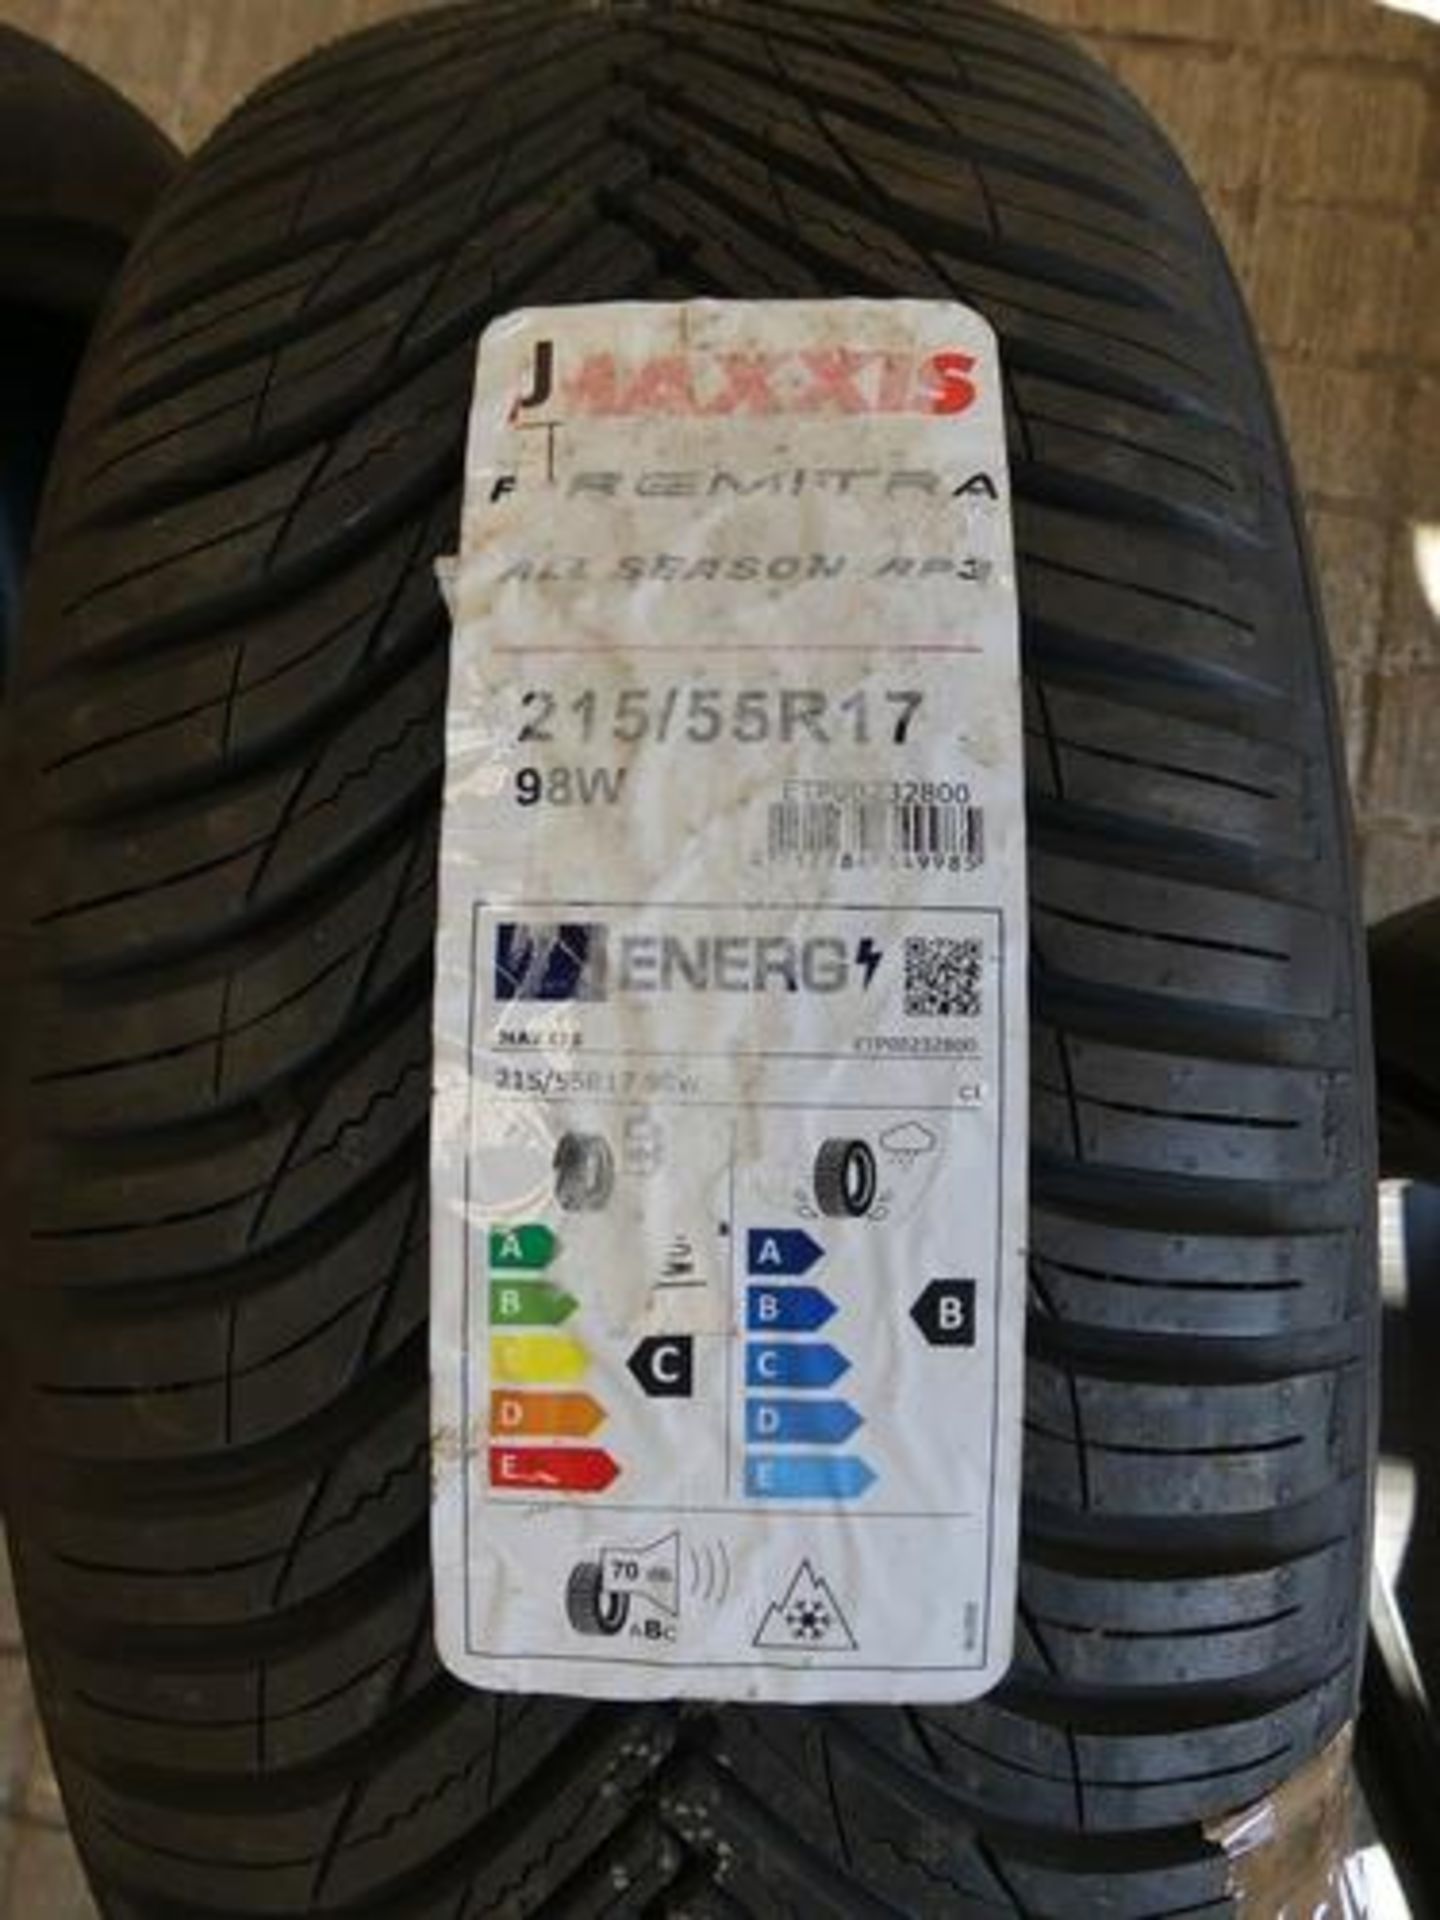 1 x Maxxis Premitra All Season AP3 tyre, size 215/55R17 98W - New with label (pallet 3)